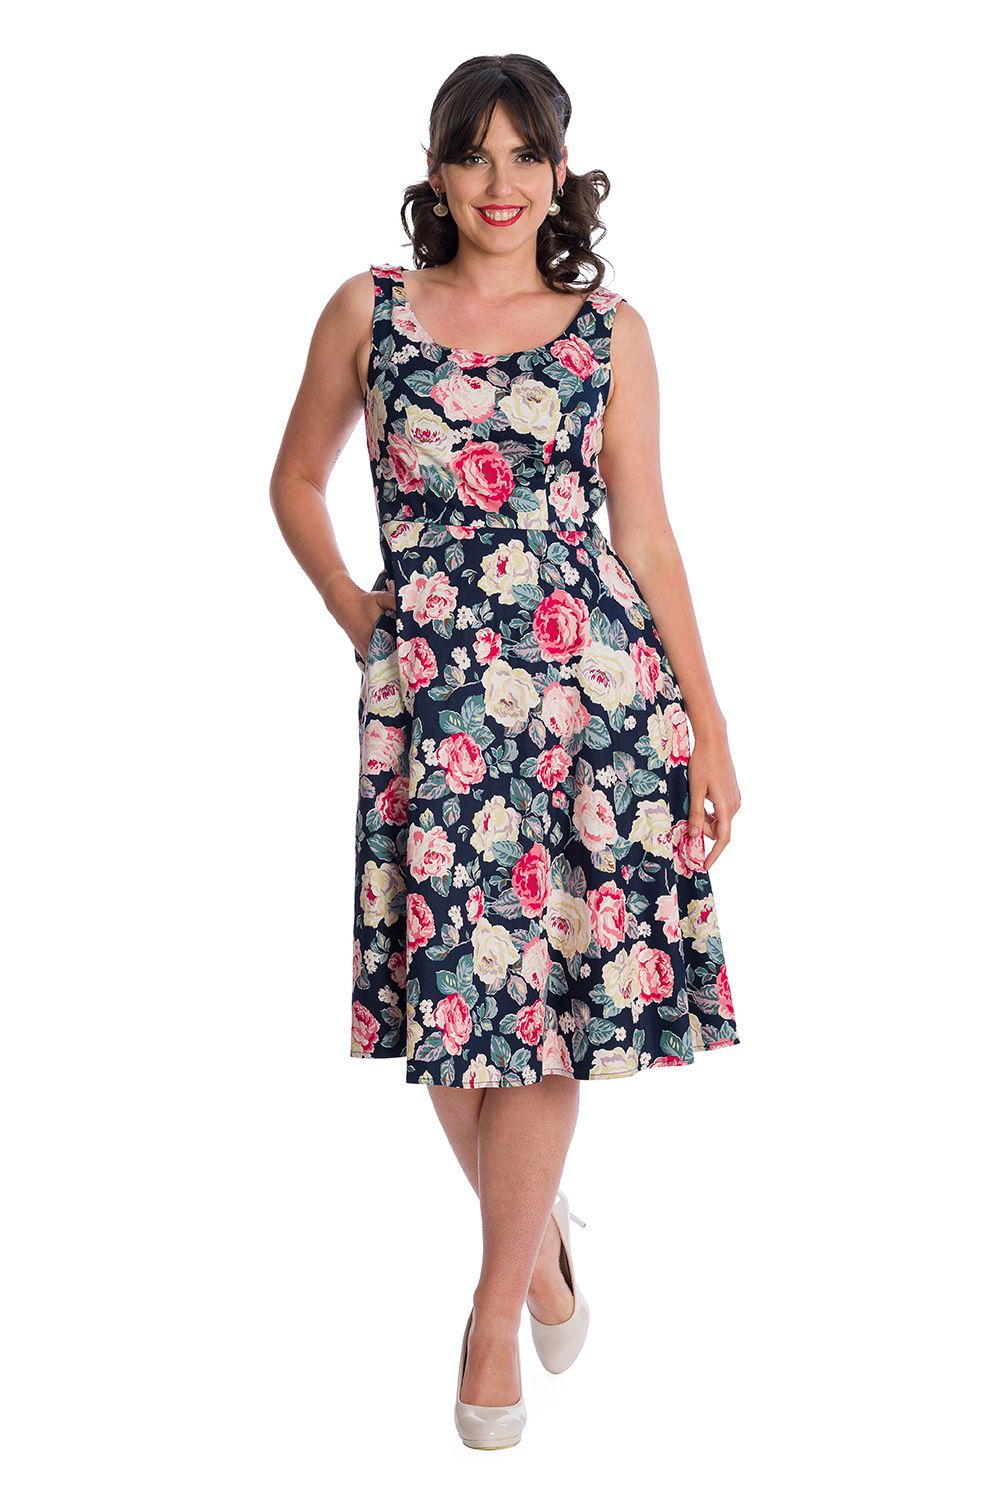 BNDR16625_robe-retro-pinup-50-s-rockabilly-banned-rose-bloom